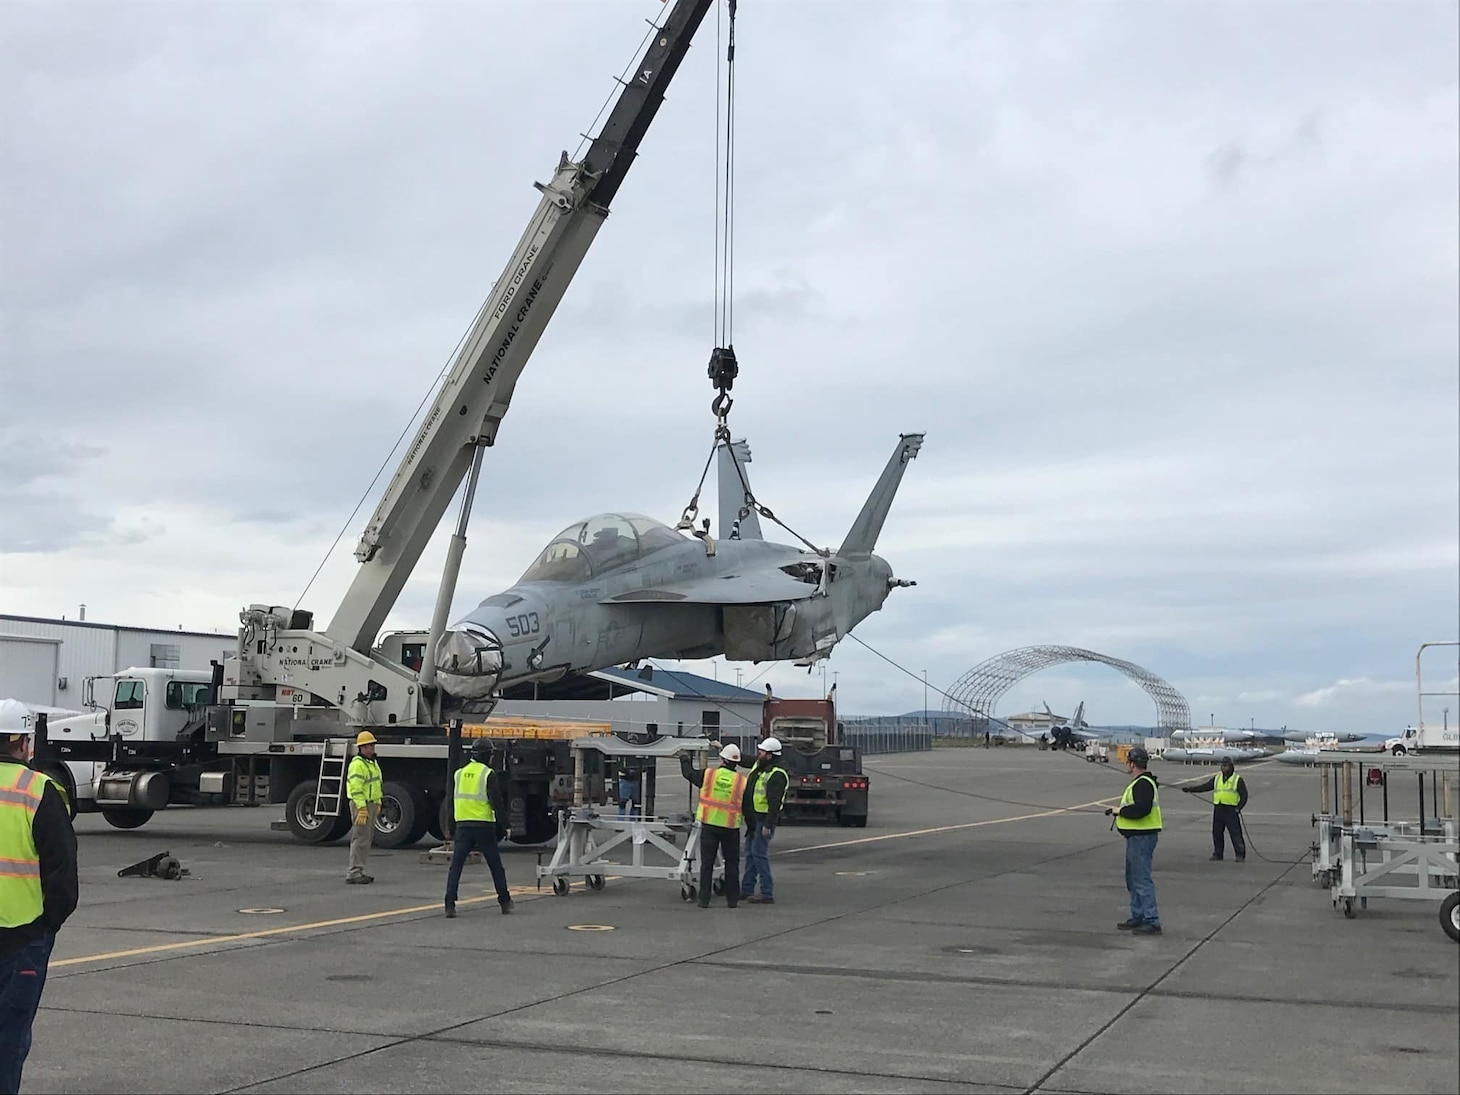 EA-18G Growler 515, assigned to Electronic Attack Squadron 129, arrives wingless at Naval Air Station Whidbey Island before undergoing refurbishment.